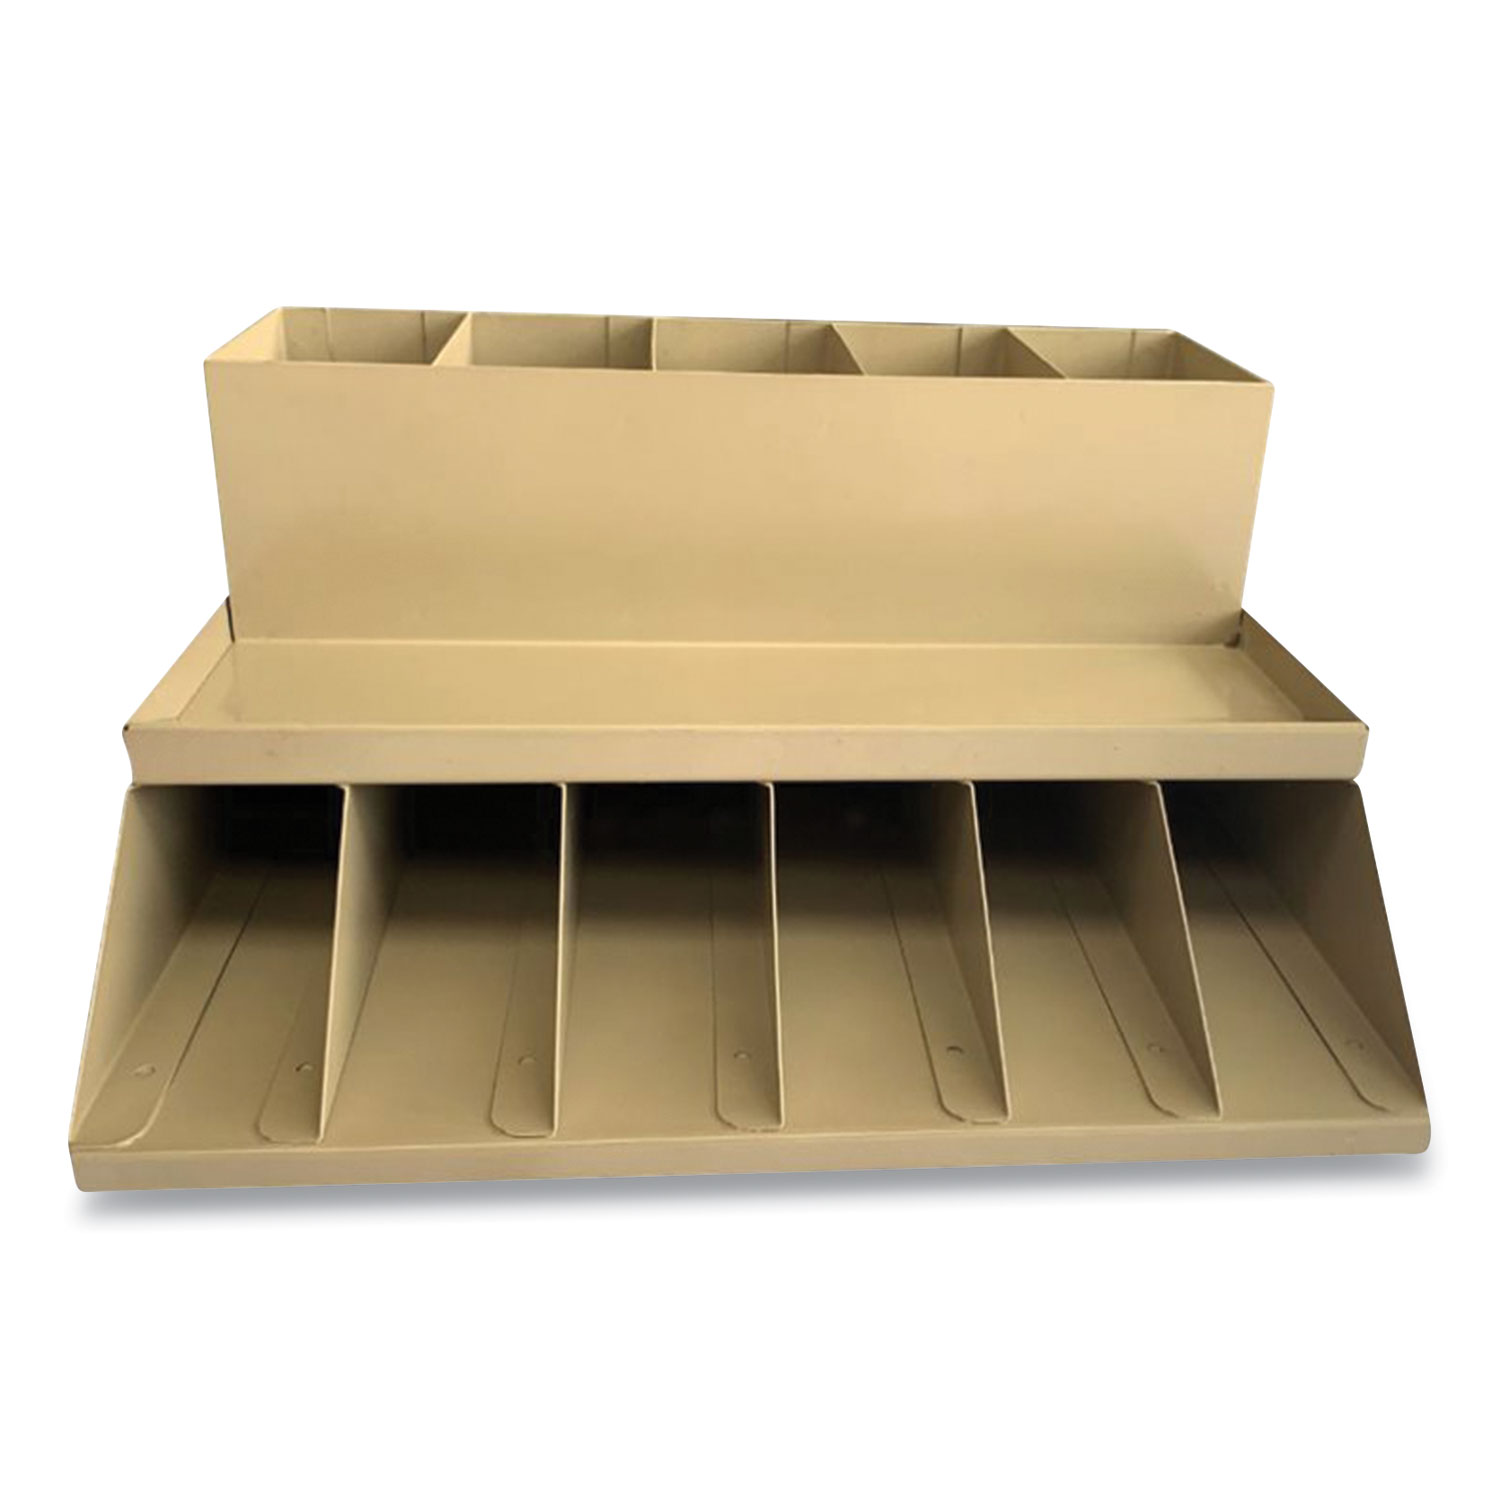 CONTROLTEK® Coin Wrapper and Bill Strap Two-Tier Rack, 11 Compartments, 9.38 x 8.13 4.63, Metal, Pebble Beige